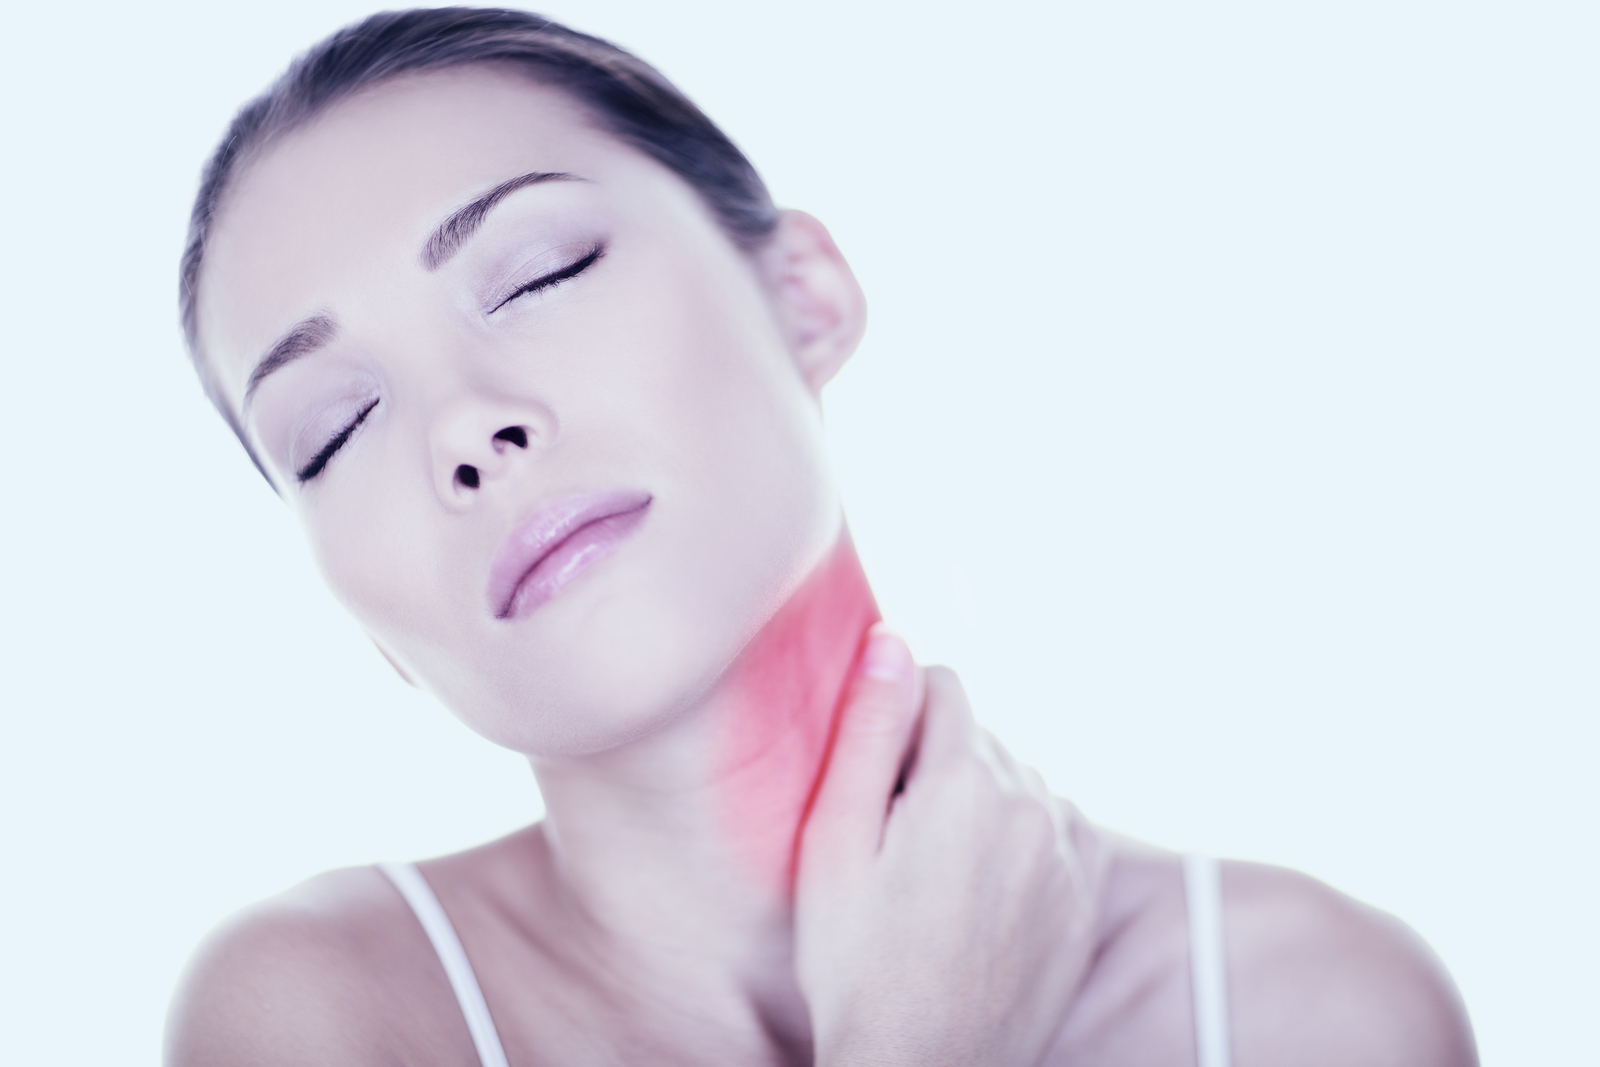 Woman with eyes closed holding neck in pain